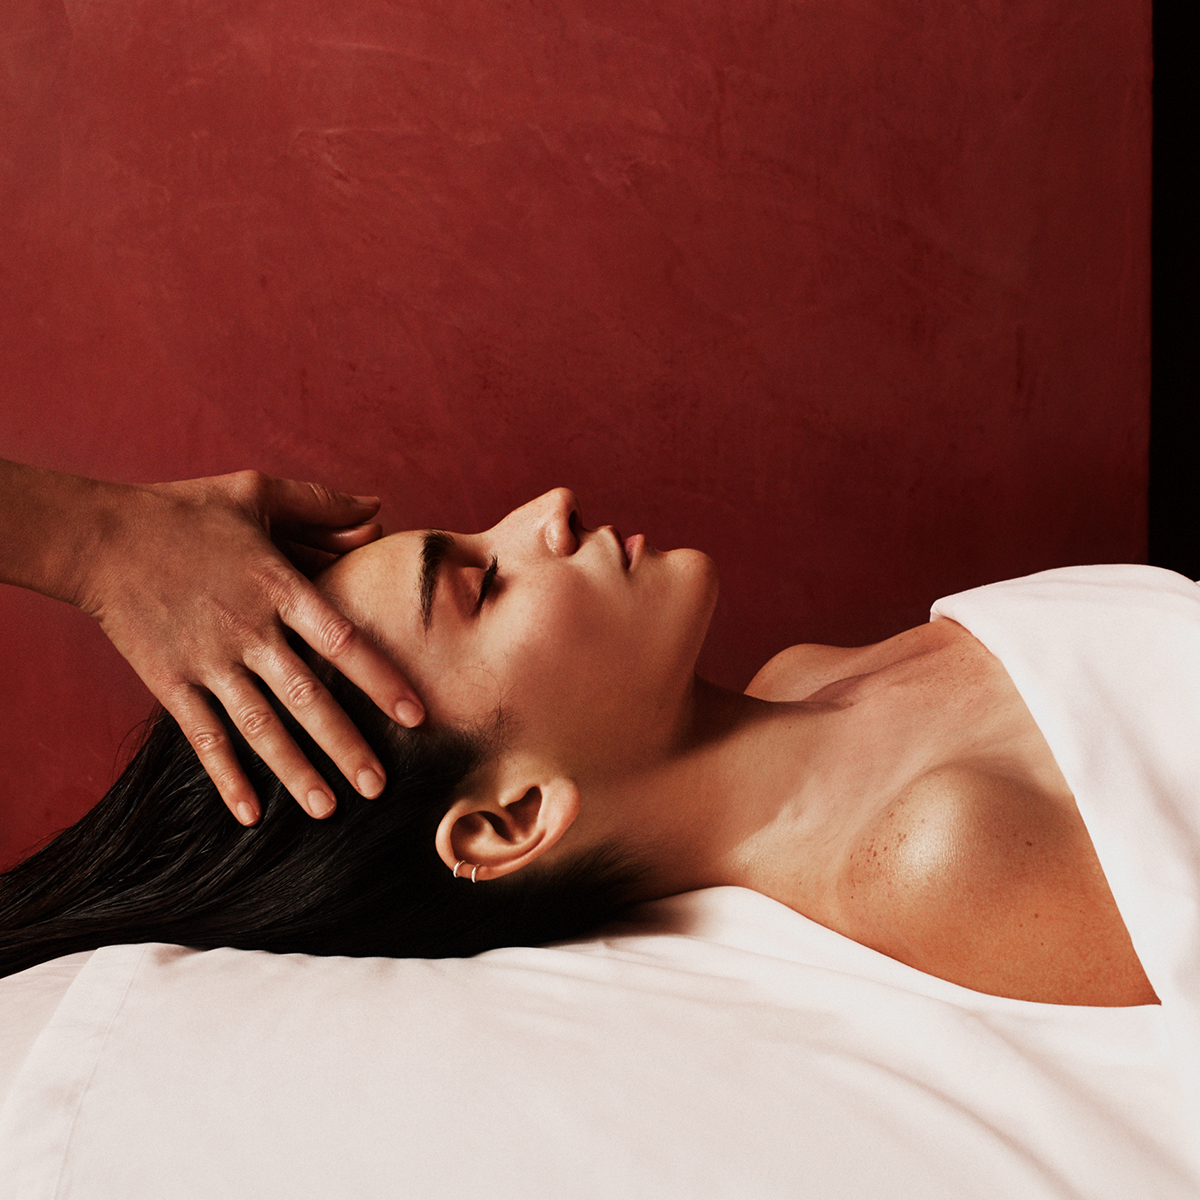 I Tried an Ayurvedic Massage to See If It'd Ease My Stress